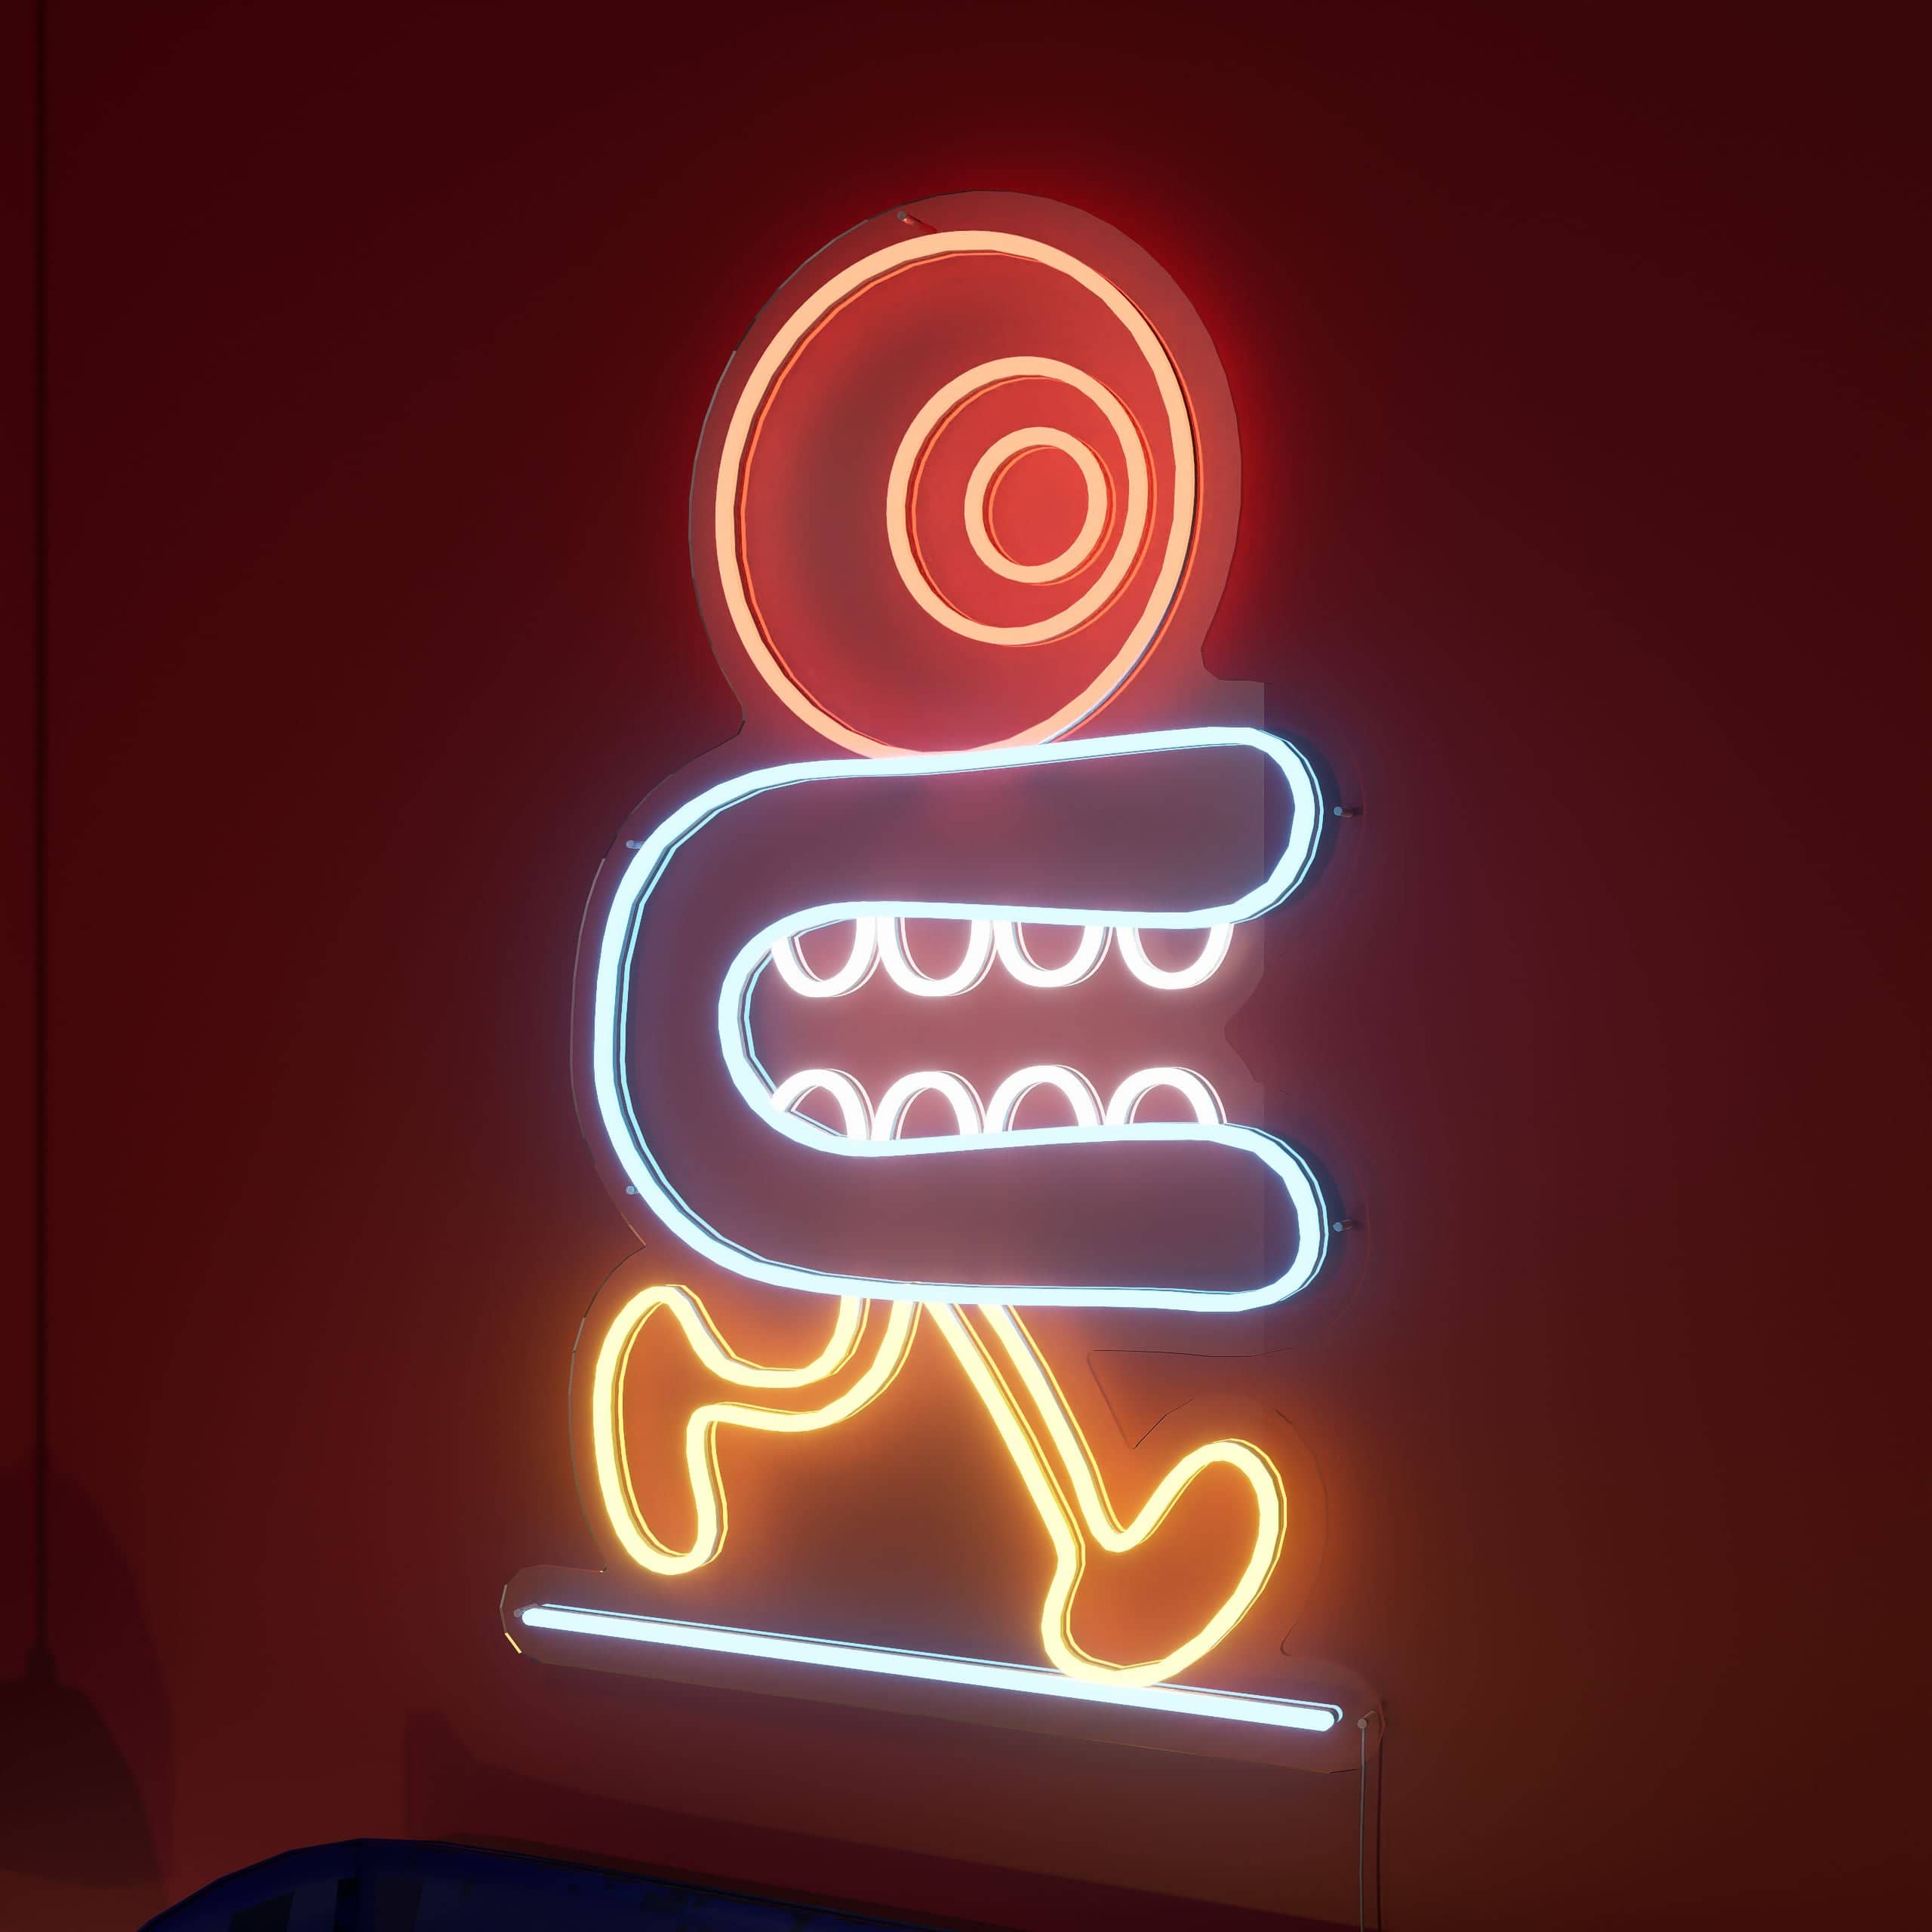 grounded-performance-of-the-plump-individual-neon-sign-lite